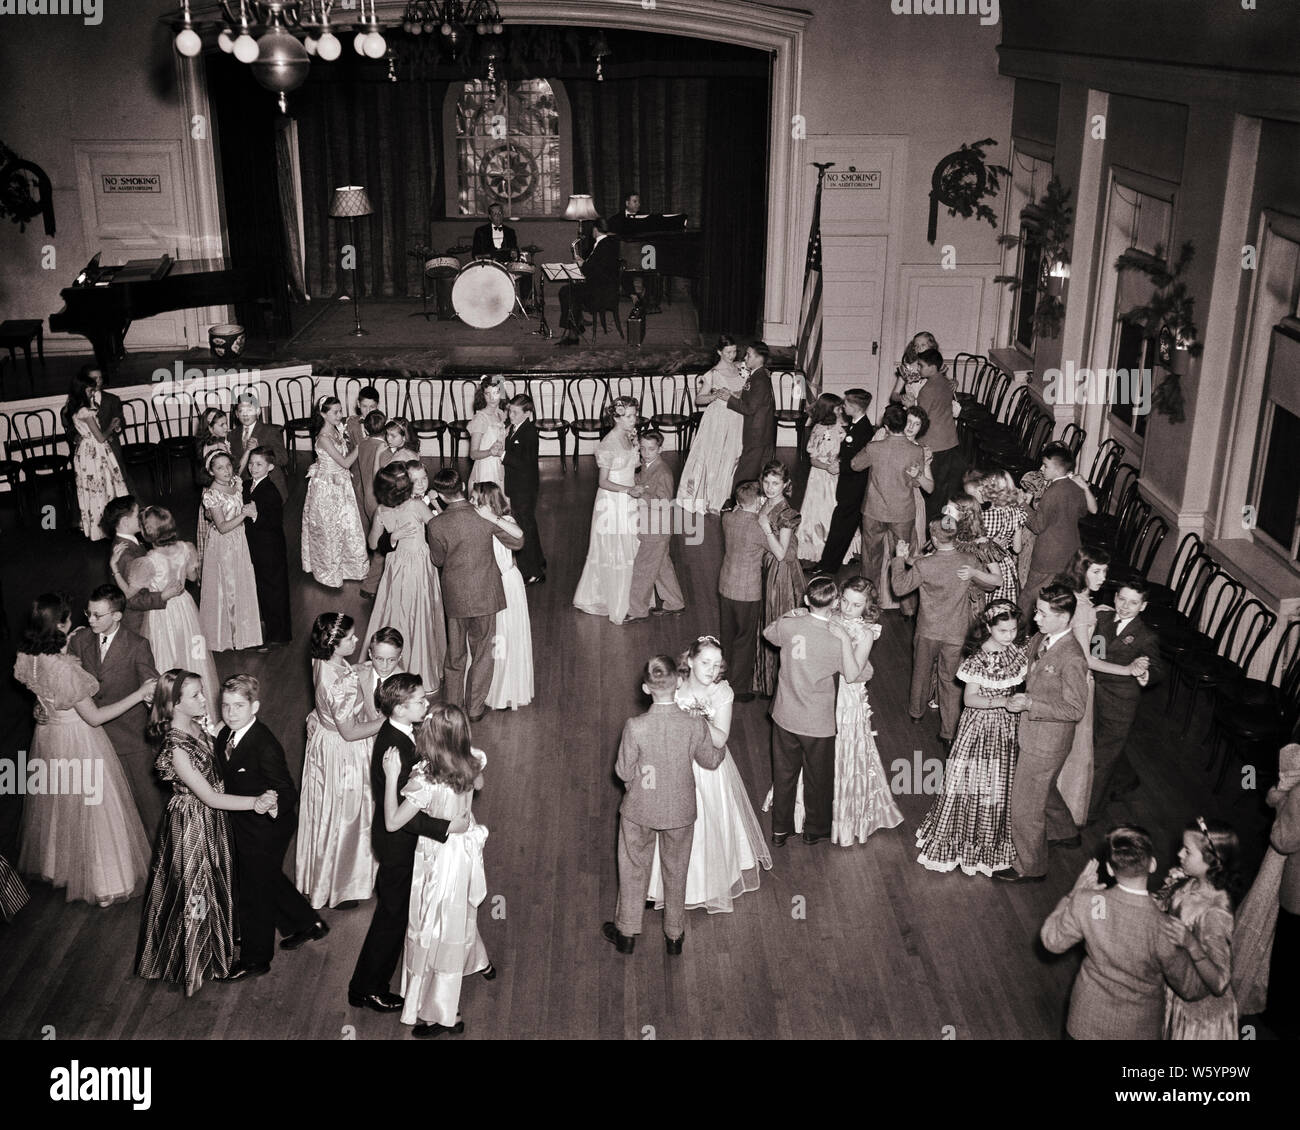 1950s TEENAGE COUPLES GIRLS AND BOYS IN FORMAL DRESSES AND SUITS DANCING AT HIGH SCHOOL SENIOR PROM WITH LIVE BAND IN AUDITORIUM - d2752 LAN001 HARS MAGIC OLD TIME BUSY FUTURE NOSTALGIA BALLROOM OLD FASHION JUVENILE BALANCE SUITS JOY LIFESTYLE CELEBRATION FEMALES HEALTHINESS UNITED STATES COPY SPACE FULL-LENGTH PERSONS UNITED STATES OF AMERICA MALES TEENAGE GIRL TEENAGE BOY ENTERTAINMENT B&W NORTH AMERICA DRESSES NORTH AMERICAN SCHOOLS WIDE ANGLE TEMPTATION SUIT AND TIE DREAMS HAPPINESS HIGH ANGLE AND EXCITEMENT RECREATION AT IN HIGH SCHOOL HIGH SCHOOLS AUDITORIUM CONCEPTUAL AWKWARD STYLISH Stock Photo